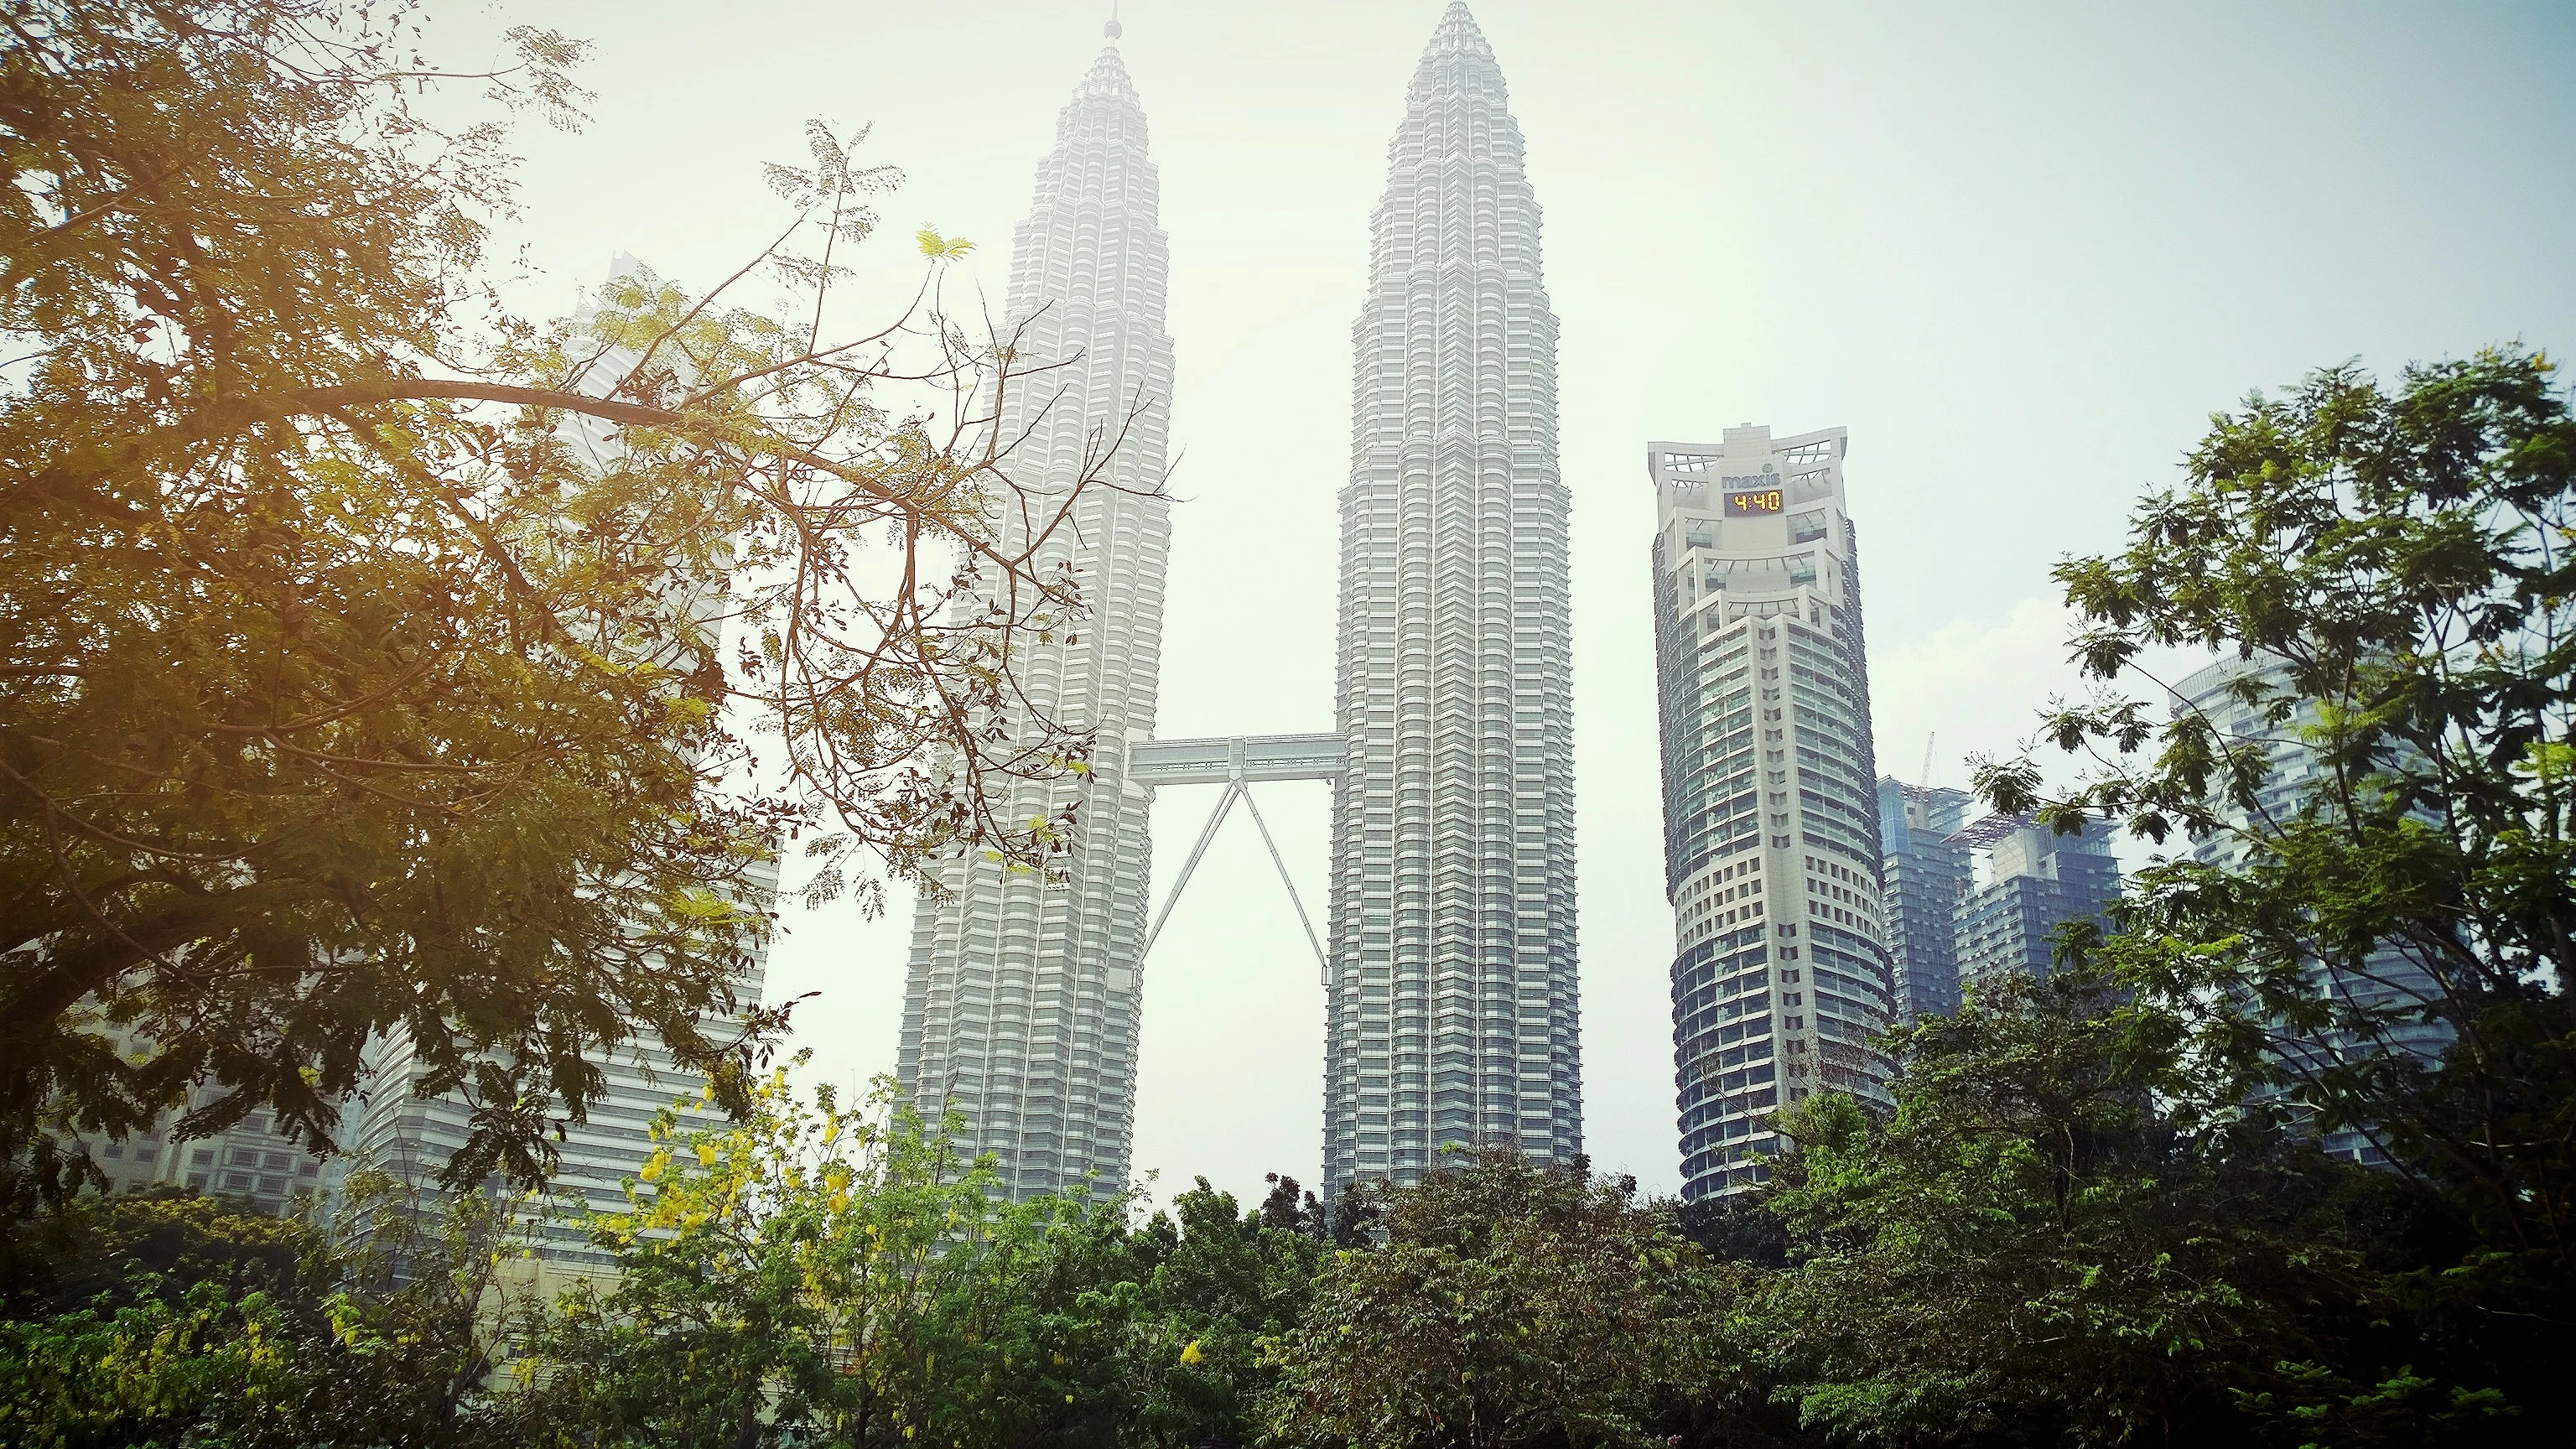 Maxis Towers (right)